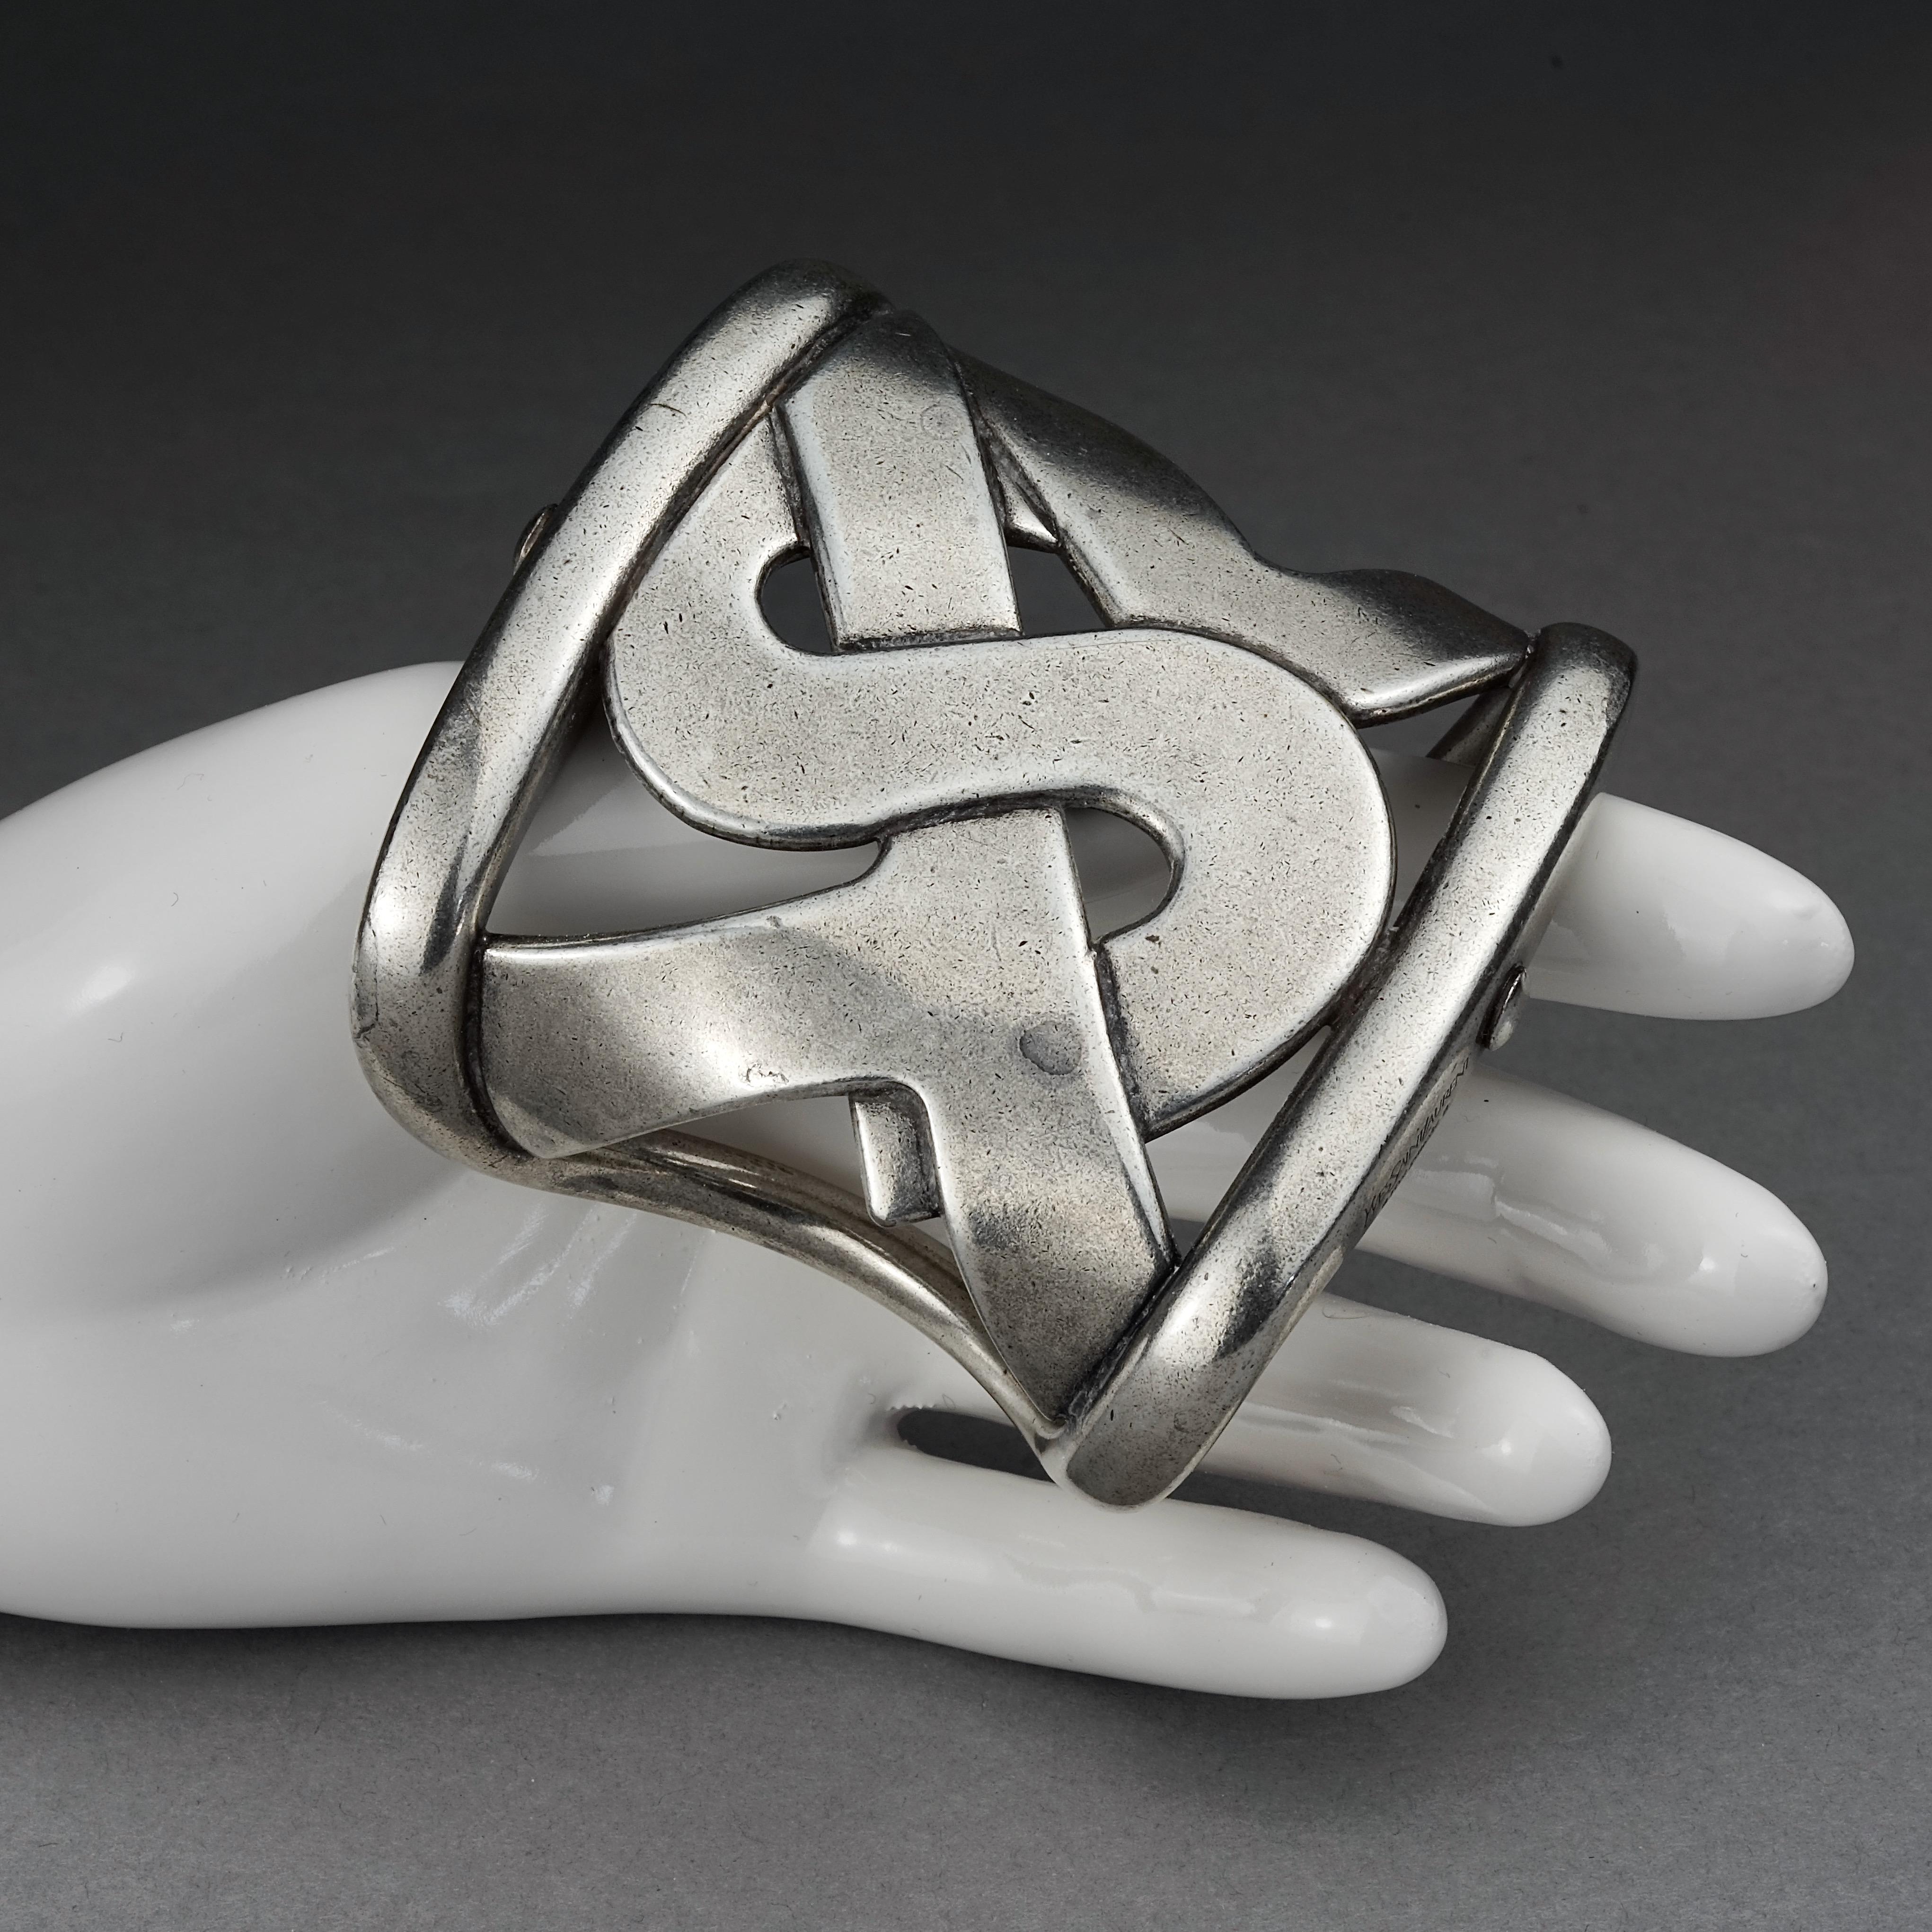 Yves Saint Laurent YSL Logo Wide Silver Cuff Bracelet In Good Condition For Sale In Kingersheim, Alsace